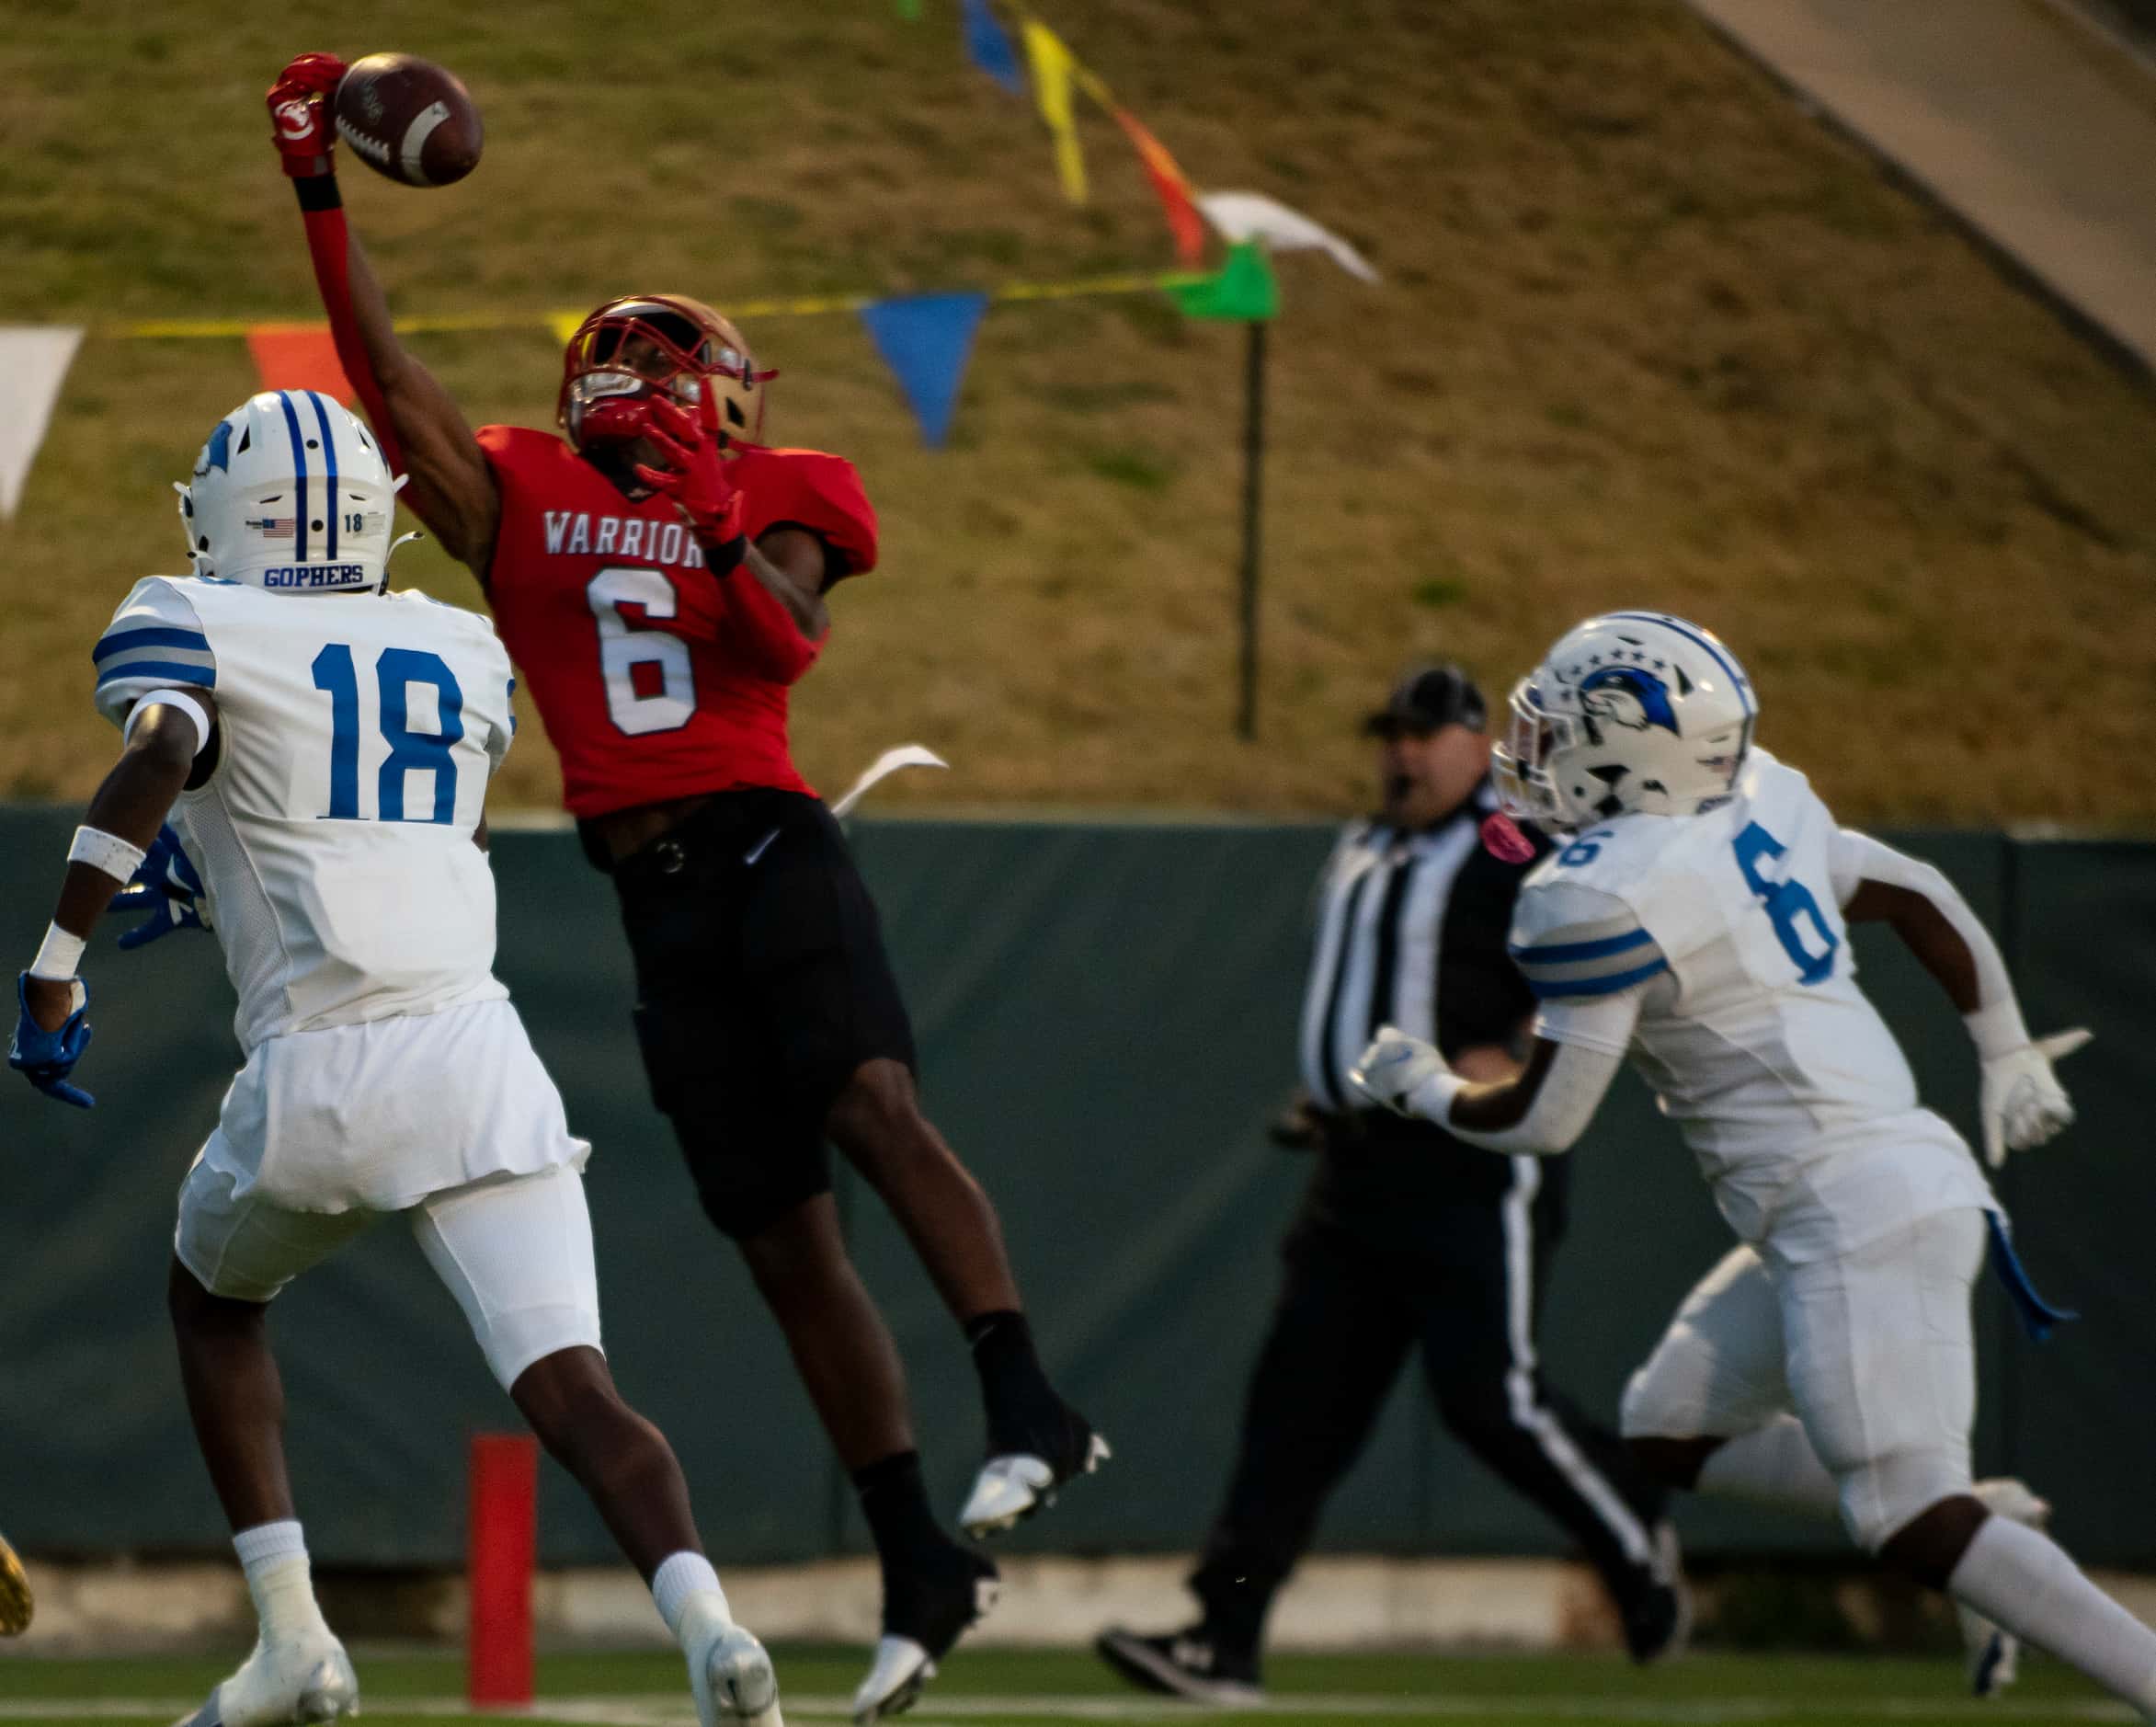 South Grand Prairie junior AJ Newberry (6) extends in the air to catch a pass during South...